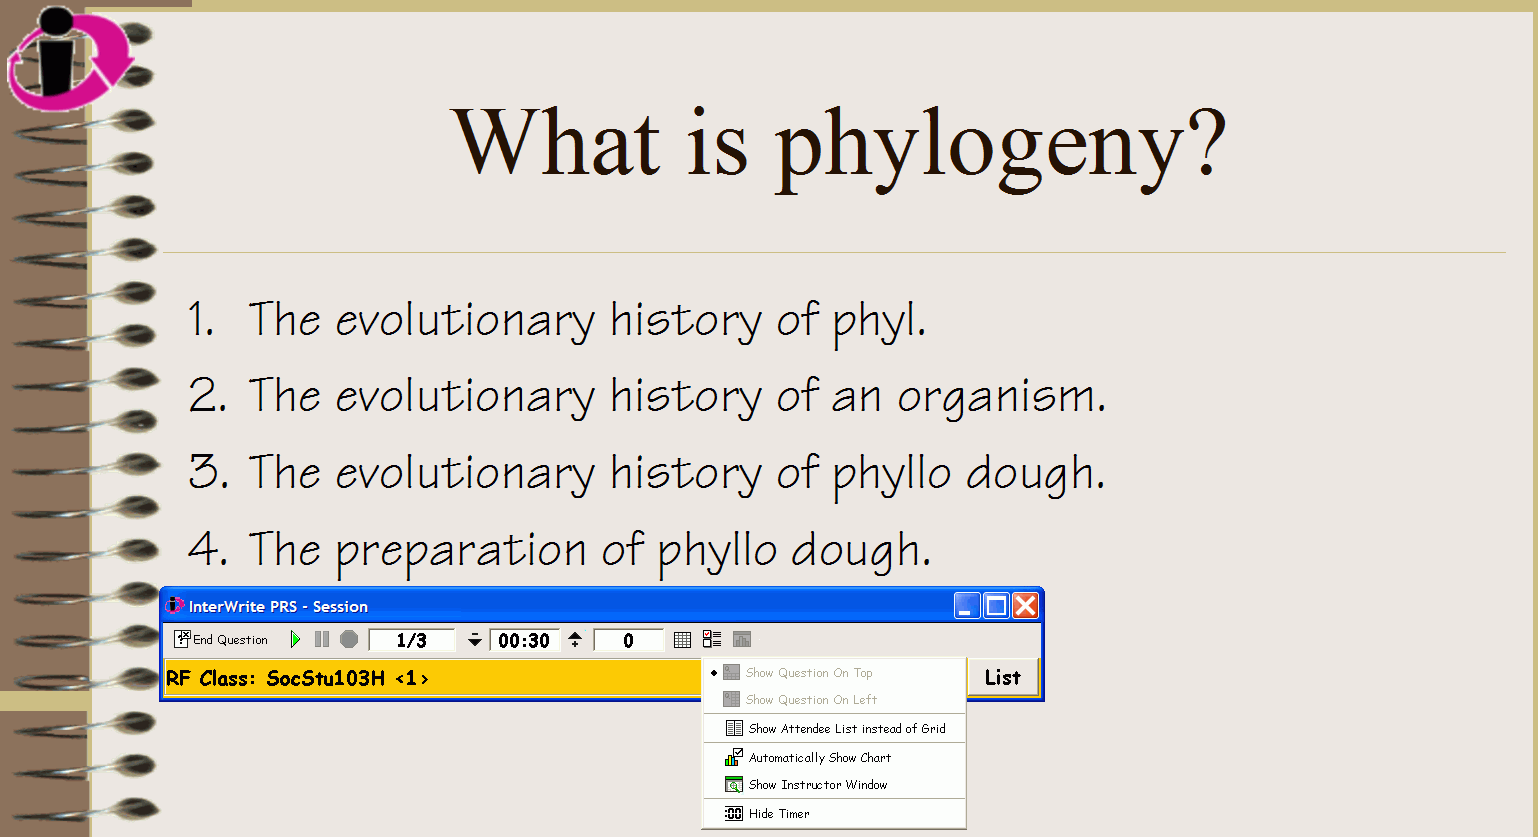 A sample PRS PowerPoint Question Slide with Toolbar for RF Session